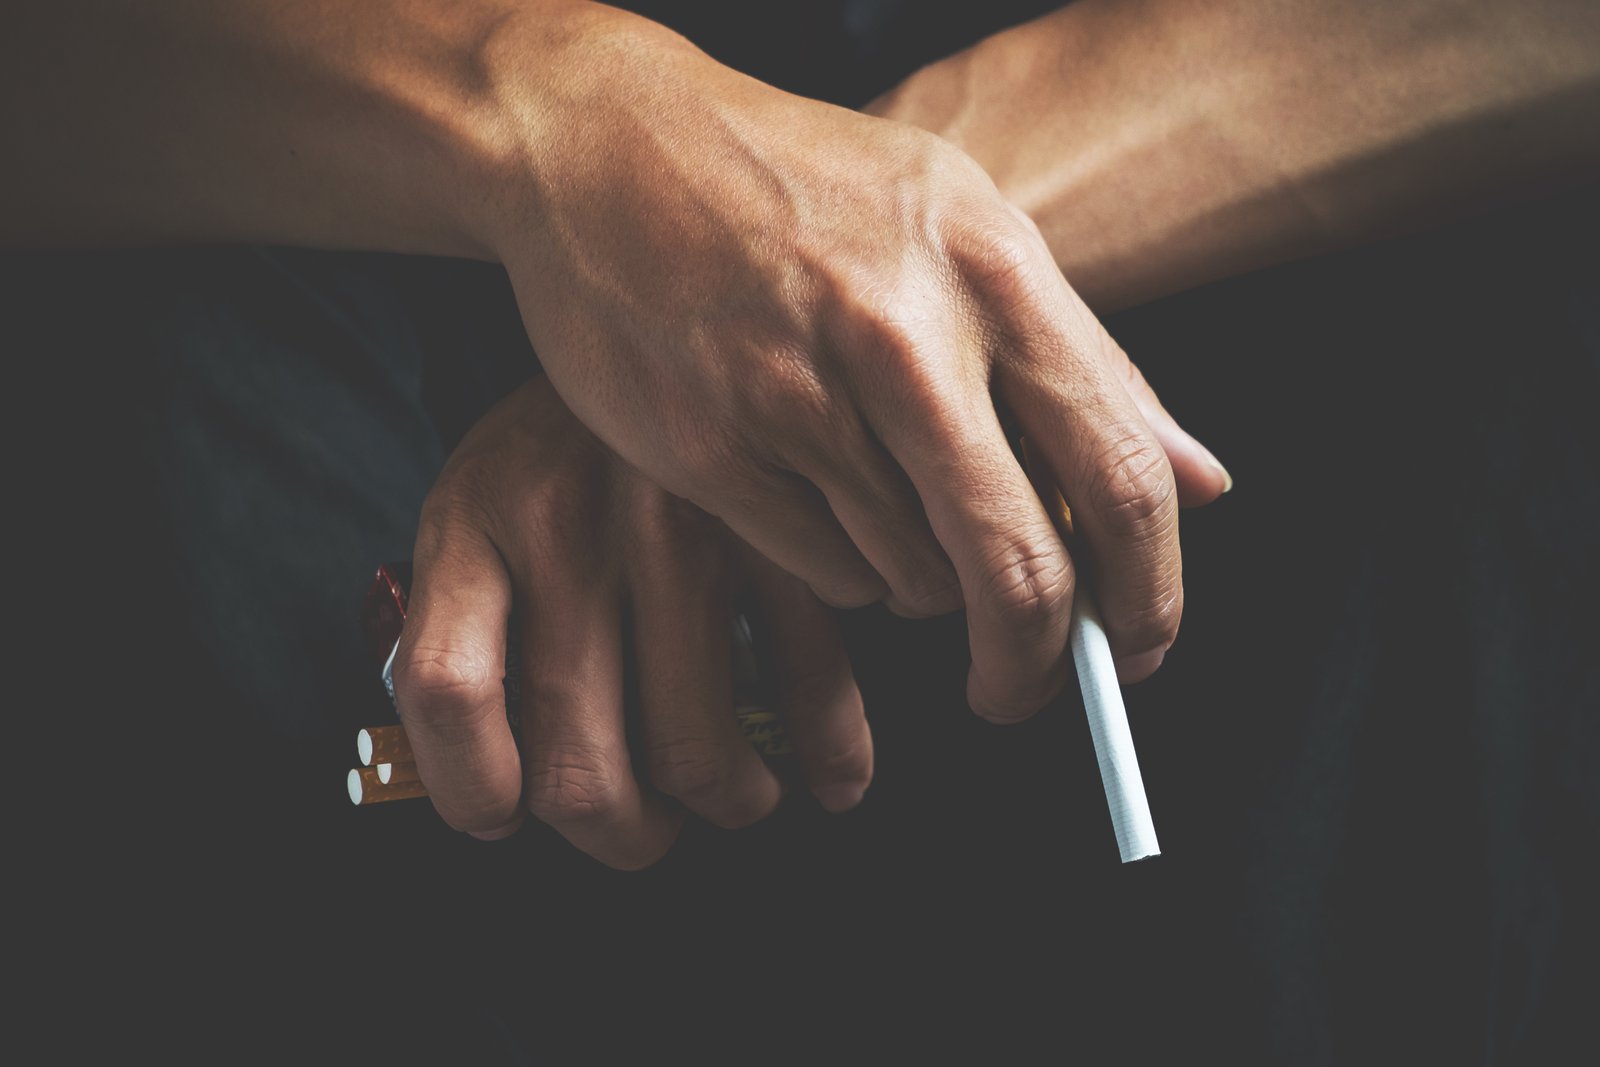 Smokers Gain Weight When They Quit Smoking: Here’s Why